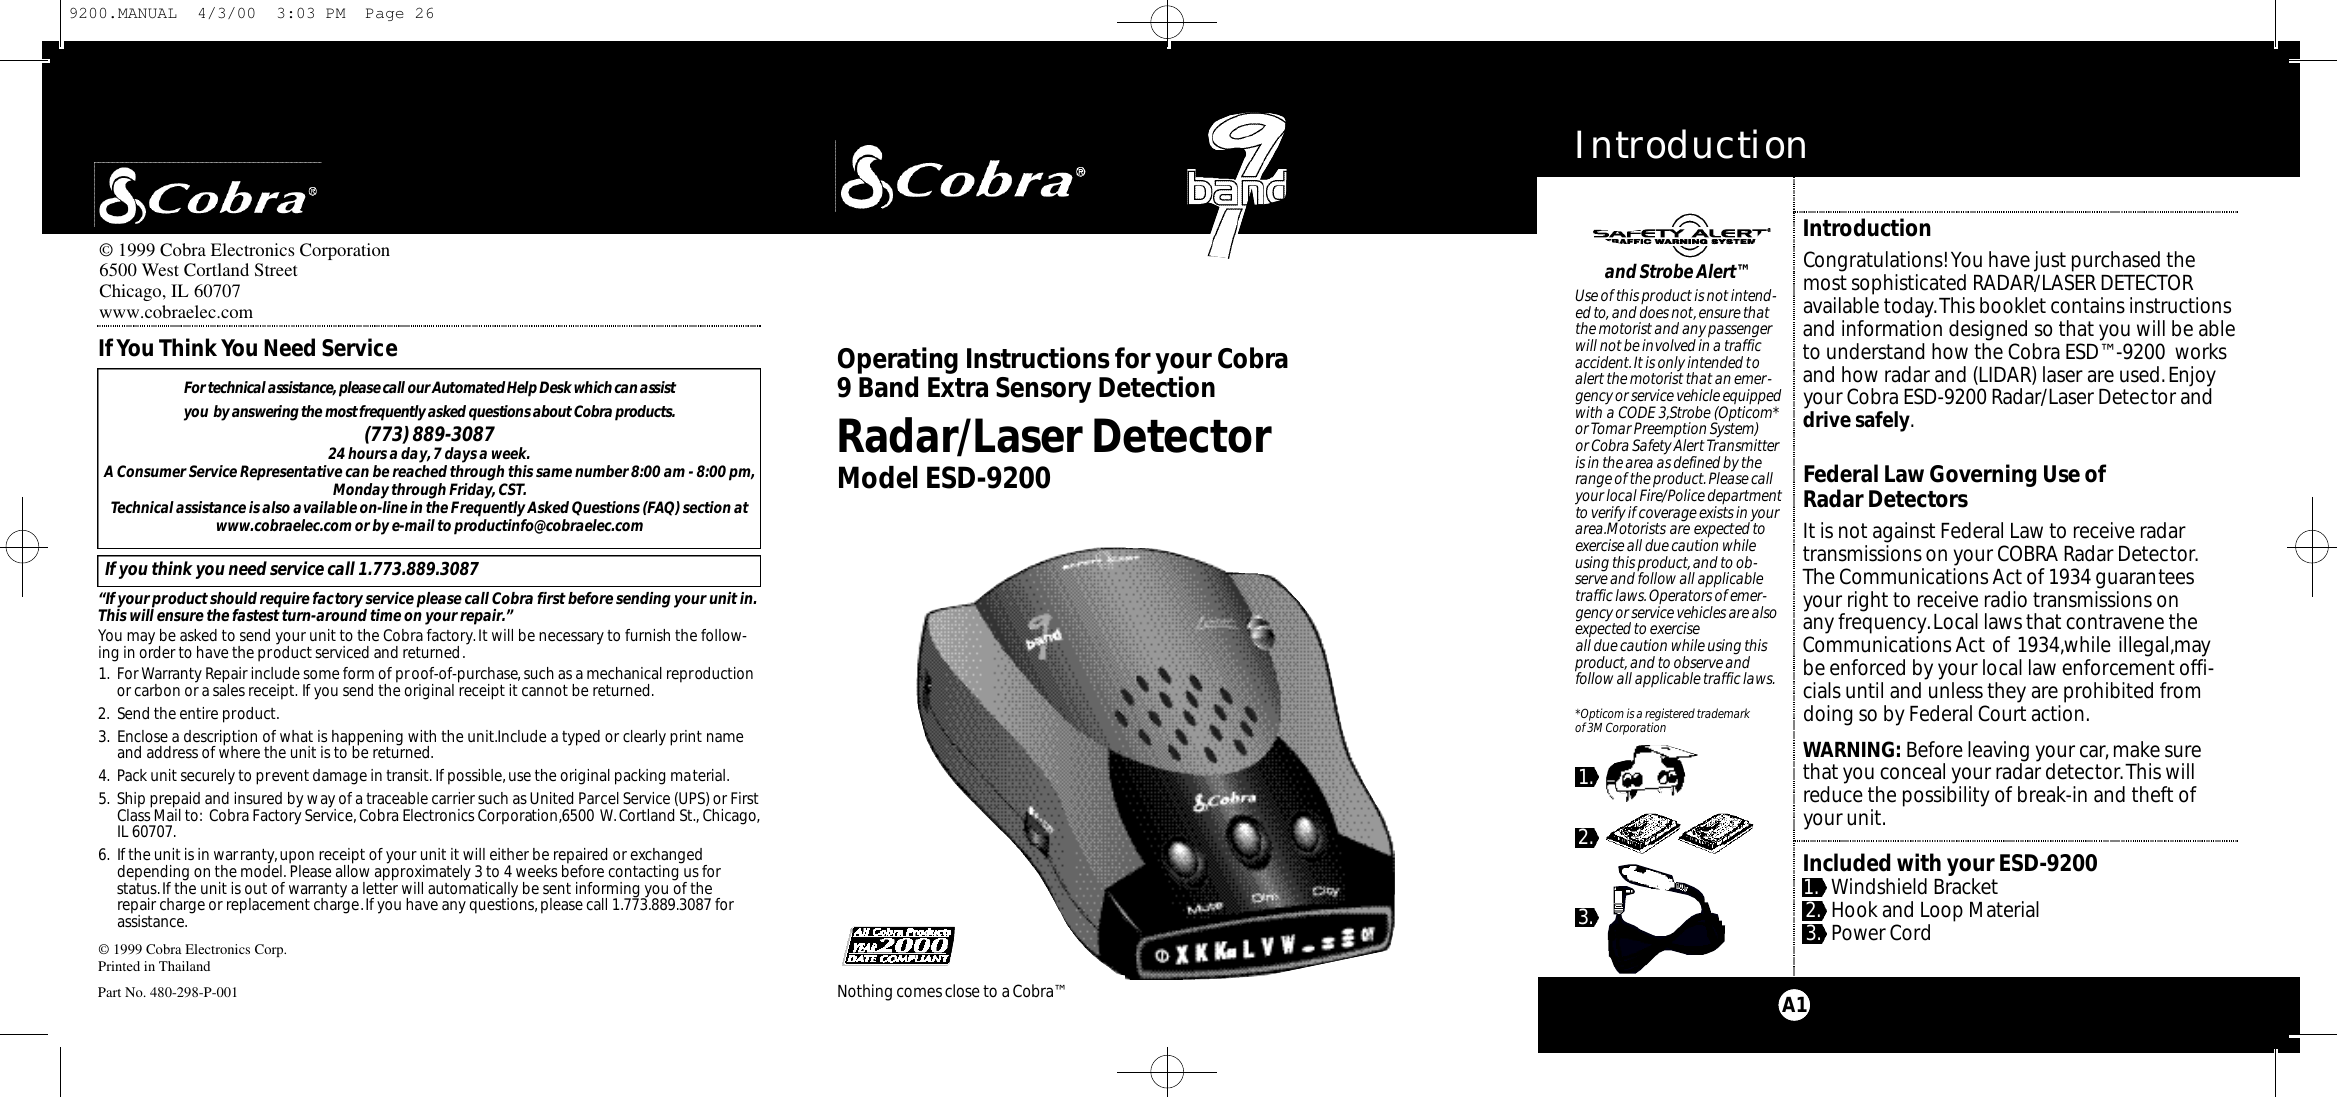 IntroductionA1IntroductionCongratulations! You have just purchased themost sophisticated RADAR/LASER DETECTORavailable today.This booklet contains instructionsand information designed so that you will be ableto understand how the Cobra ESD™-9200  worksand how radar and (LIDAR) laser are used.Enjoyyour Cobra ESD-9200 Radar/Laser Detector anddrive safely.Federal Law Governing Use of Radar DetectorsIt is not against Federal Law to receive radar transmissions on your COBRA Radar Detector.The Communications Act of 1934 guarantees your right to receive radio transmissions on any frequency.Local laws that contravene theCommunications Act of 1934,while illegal,maybe enforced by your local law enforcement offi-cials until and unless they are prohibited fromdoing so by Federal Court action.WARNING: Before leaving your car,make surethat you conceal your radar detector.This willreduce the possibility of break-in and theft ofyour unit.Included with your ESD-92001. Windshield Bracket2. Hook and Loop Material3. Power CordM i c ro Ta l kRadar/Laser DetectorModel ESD-9200O pe r ating Instru ctions for your Co b ra 9 Band Ext ra Se n s o ry De te ct i o n© 1999 Cobra Electronics Corp.Printed in ThailandPart No. 480-298-P-001For te c h n i cal assistance,please call our Au to m a t ed Help Desk which can assist you  by answering the most fre q u e n t ly asked questions about Co b r a prod u ct s .(773) 889-3087 24 hours a day,7 days a week.A Consumer Service Representative can be reached through this same number 8:00 am - 8:00 pm,Monday through Friday,CST.Technical assistance is also available on-line in the Frequently Asked Questions (FAQ) section atwww.cobraelec.com or by e-mail to productinfo@cobraelec.comIf you think you need service call 1.773.889.3087“If your product should require factory service please call Cobra first before sending your unit in.This will ensure the fastest turn-around time on your repair.”You may be asked to send your unit to the Cobra factory.It will be necessary to furnish the follow-ing in order to have the product serviced and returned.1. For Warranty Repair include some form of proof-of-purchase, such as a mechanical reproductionor carbon or a sales receipt. If you send the original receipt it cannot be returned.2. Send the entire product.3. Enclose a description of what is happening with the unit.Include a typed or clearly print nameand address of where the unit is to be returned.4. Pack unit securely to prevent damage in transit. If possible,use the original packing material.5. Ship prepaid and insured by way of a traceable carrier such as United Parcel Service (UPS) or FirstClass Mail to: Cobra Factory Service,Cobra Electronics Corporation,6500 W.Cortland St., Chicago,IL 60707.6. If the unit is in warranty,upon receipt of your unit it will either be repaired or exchangeddepending on the model. Please allow approximately 3 to 4 weeks before contacting us for status.If the unit is out of warranty a letter will automatically be sent informing you of the repair charge or replacement charge.If you have any questions, please call 1.773.889.3087 forassistance.If You Think You Need Serviceand Strobe Alert™Use of this product is not intend-ed to, and does not,ensure thatthe motorist and any passengerwill not be involved in a trafficaccident.It is only intended toalert the motorist that an emer-gency or service vehicle equippedwith a CODE 3,Strobe (Opticom*or Tomar Preemption System) or Cobra Safety Alert Transmitteris in the area as defined by therange of the product.Please callyour local Fire/Police departmentto verify if coverage exists in yourarea.Motorists are expected toexercise all due caution whileusing this product,and to ob-serve and follow all applicabletraffic laws.Operators of emer-gency or service vehicles are alsoexpected to exercise all due caution while using thisproduct, and to observe and follow all applicable traffic laws.*Opticom is a registered trademark of 3M Corporation1.2.3.Nothing comes close to a Co b ra ™© 1999 Cobra Electronics Corporation6500 West Cortland StreetChicago, IL 60707www.cobraelec.com9200.MANUAL  4/3/00  3:03 PM  Page 26